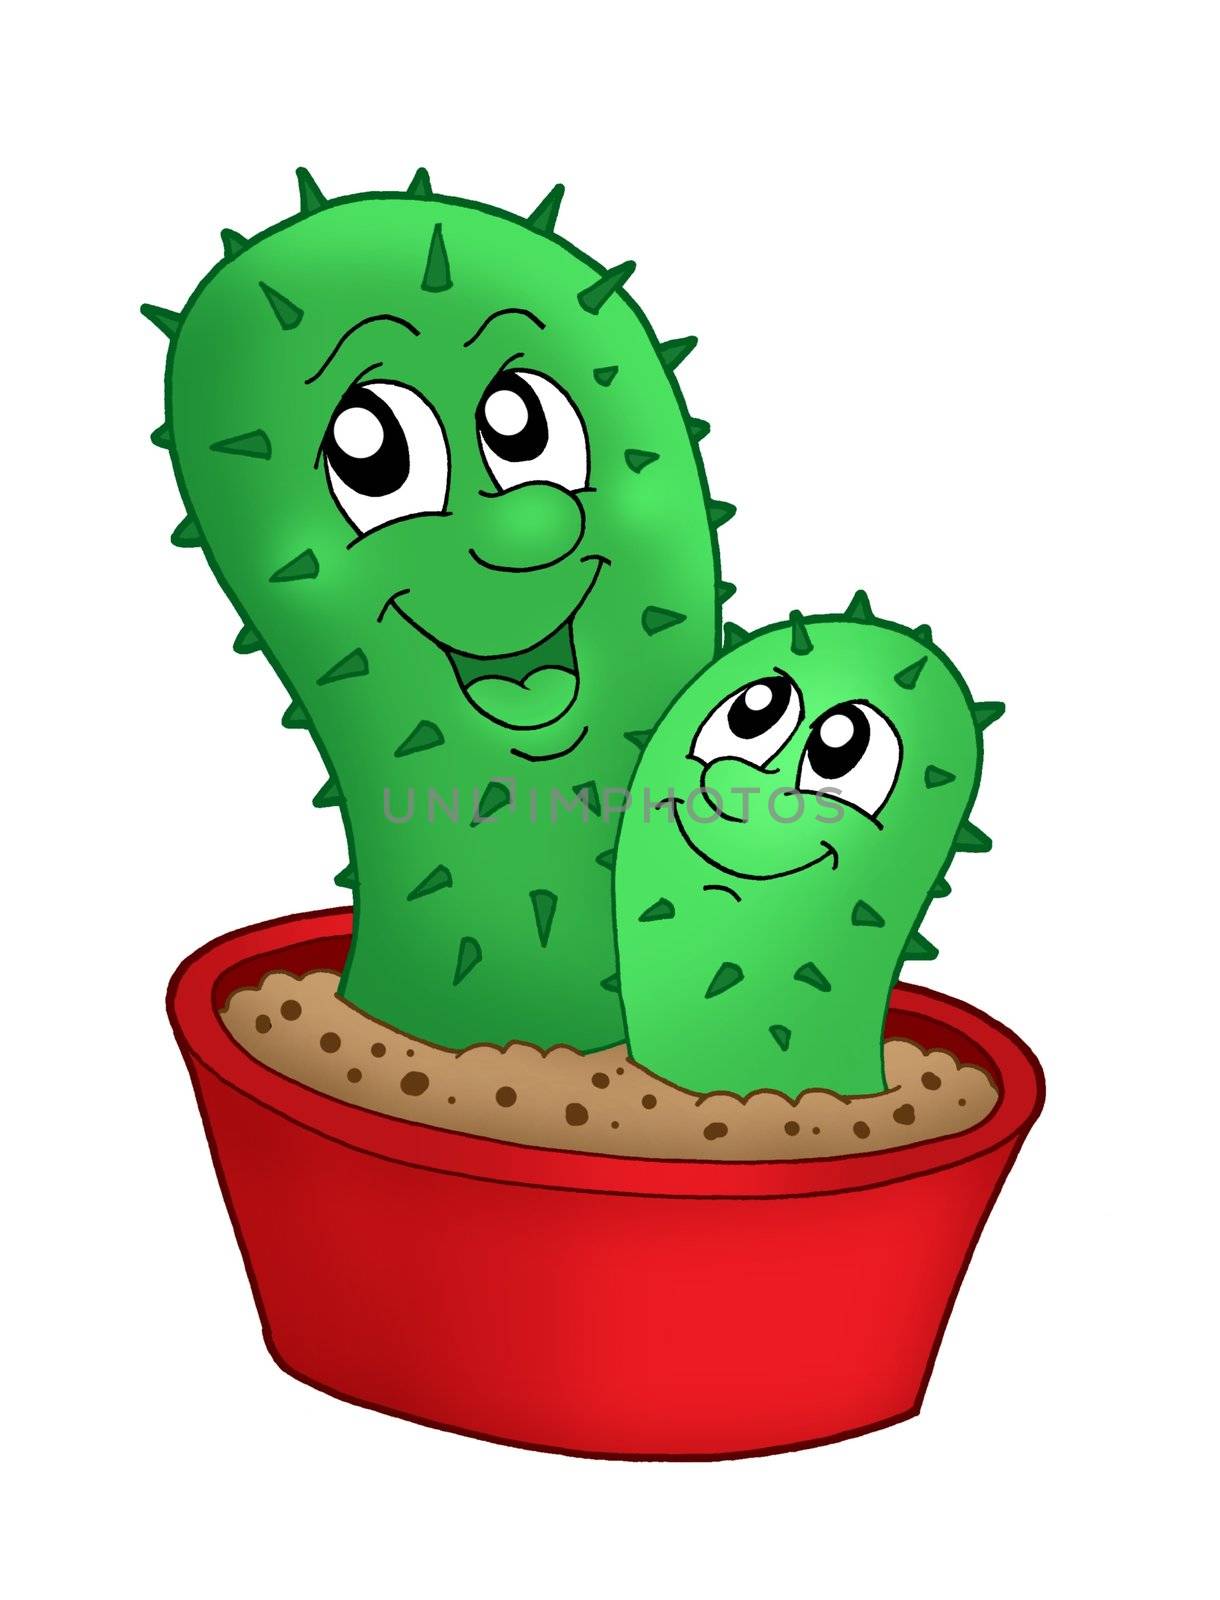 Pair of cactuses - color illustration.